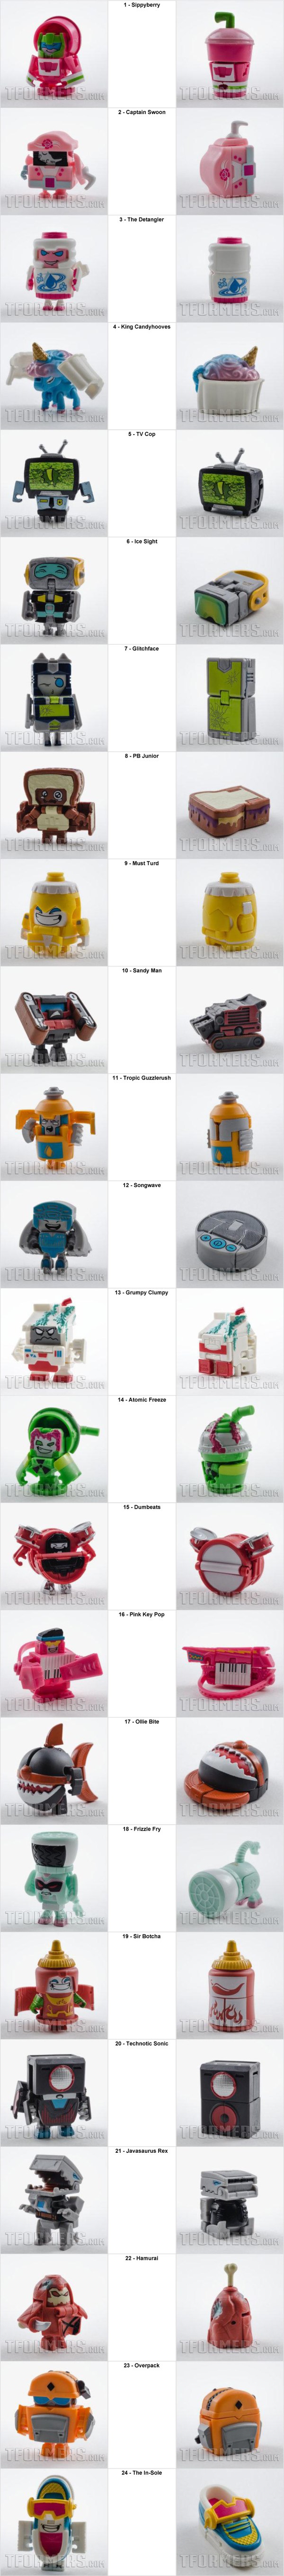 Transformers BotBots Series 2 Codes   Blind Pack Assortment ID Guide (2 of 2)